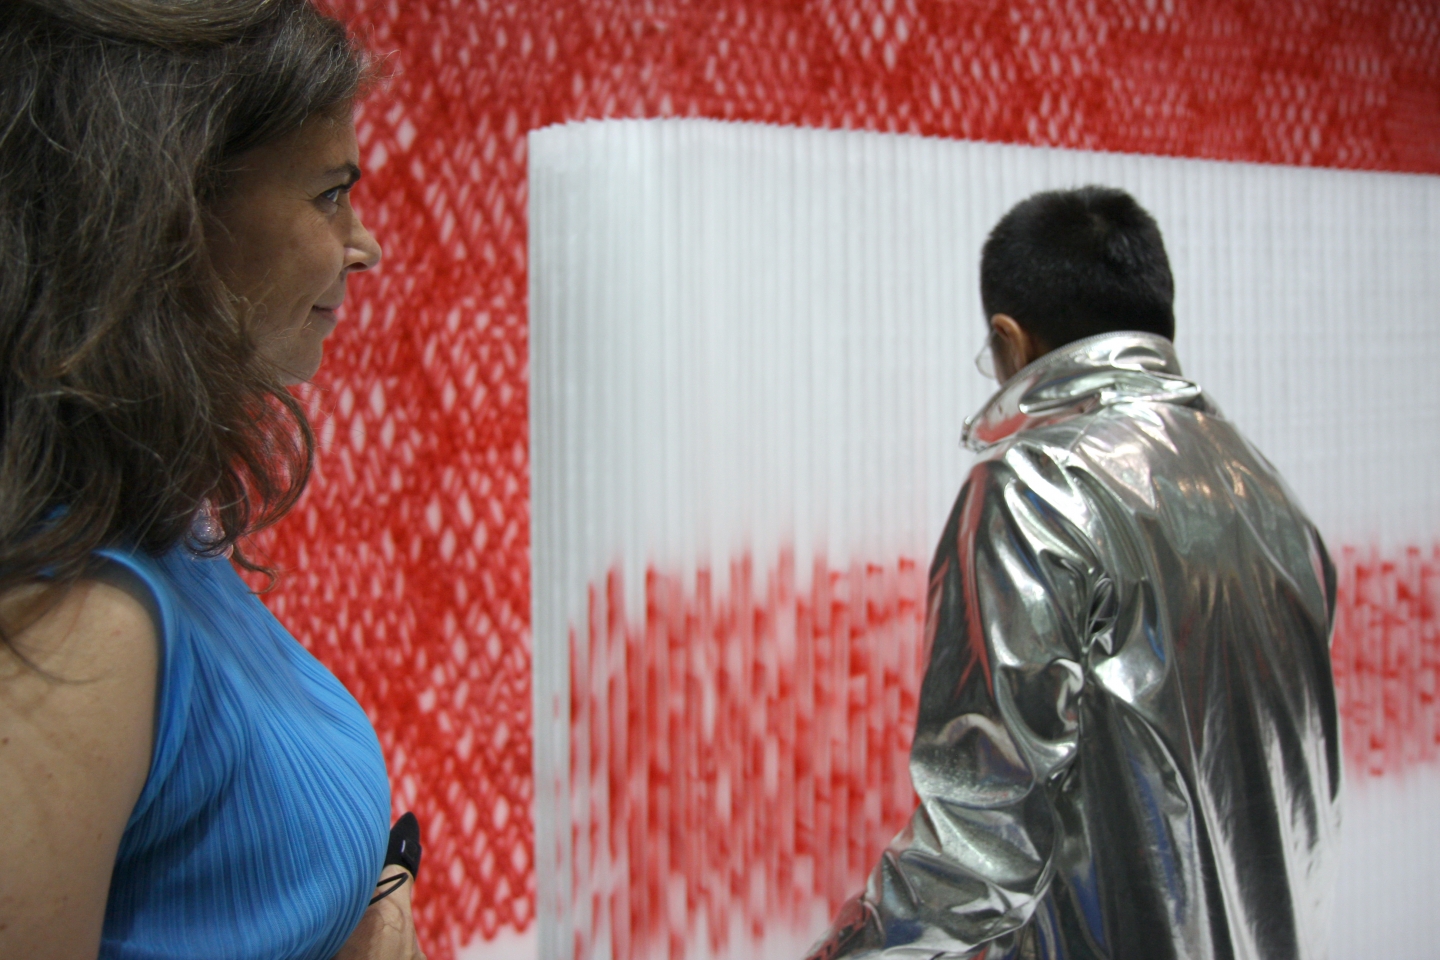 Sasaki heartbeat softwall installation at Dwell on Design in Los Angeles